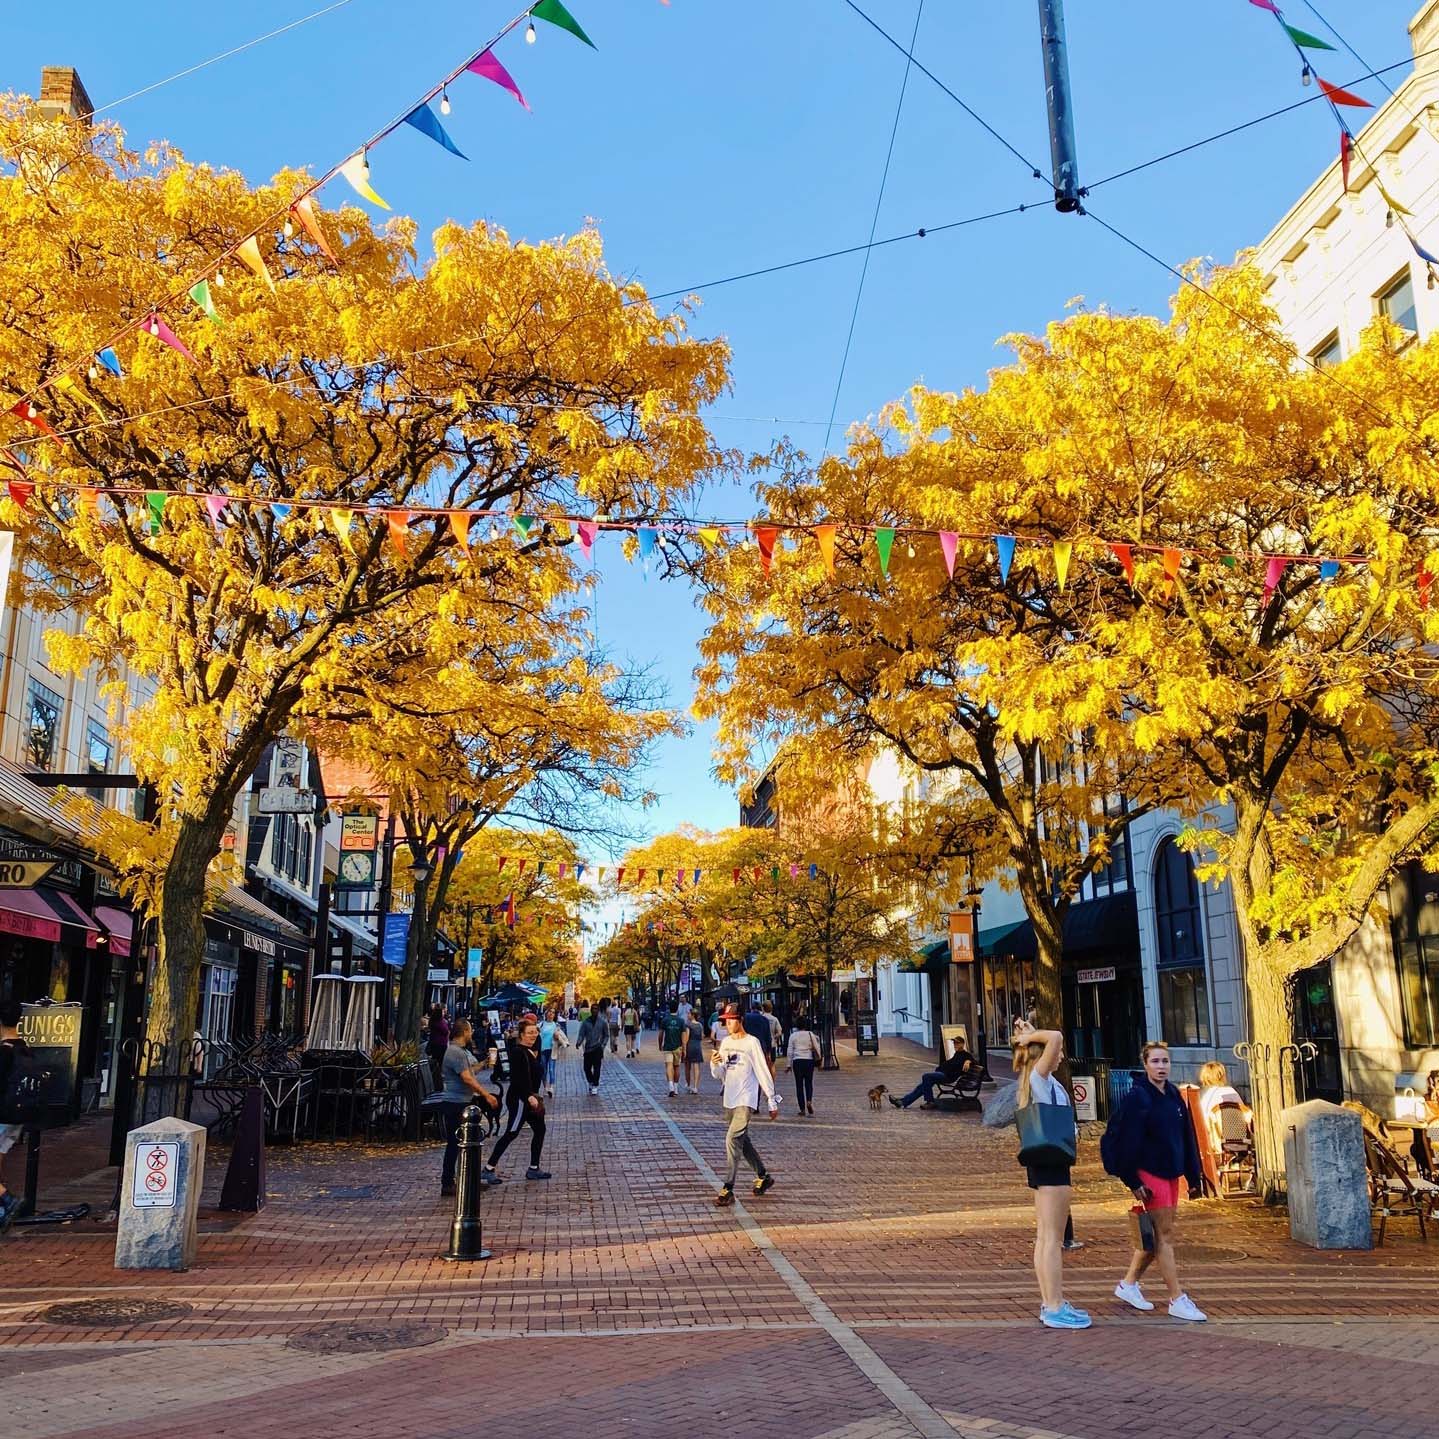 A fall day on Church street. Young people are socializing on the tree-lined brick street. A man is resting on a bench with his dog.